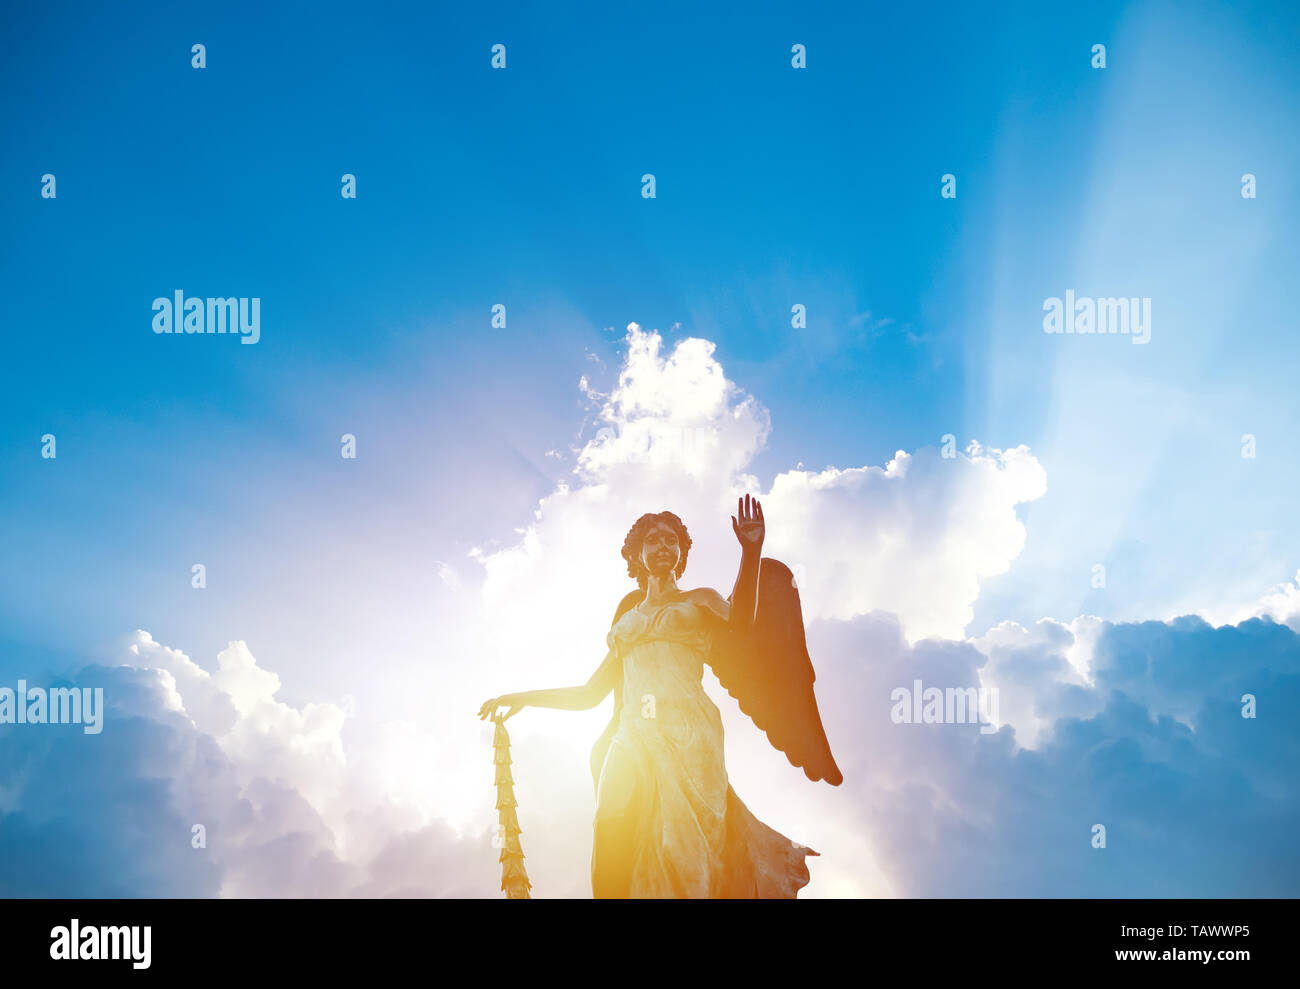 silhouette of angel statue sculpture with sunlight shining behind white cloud with blue sky background Stock Photo